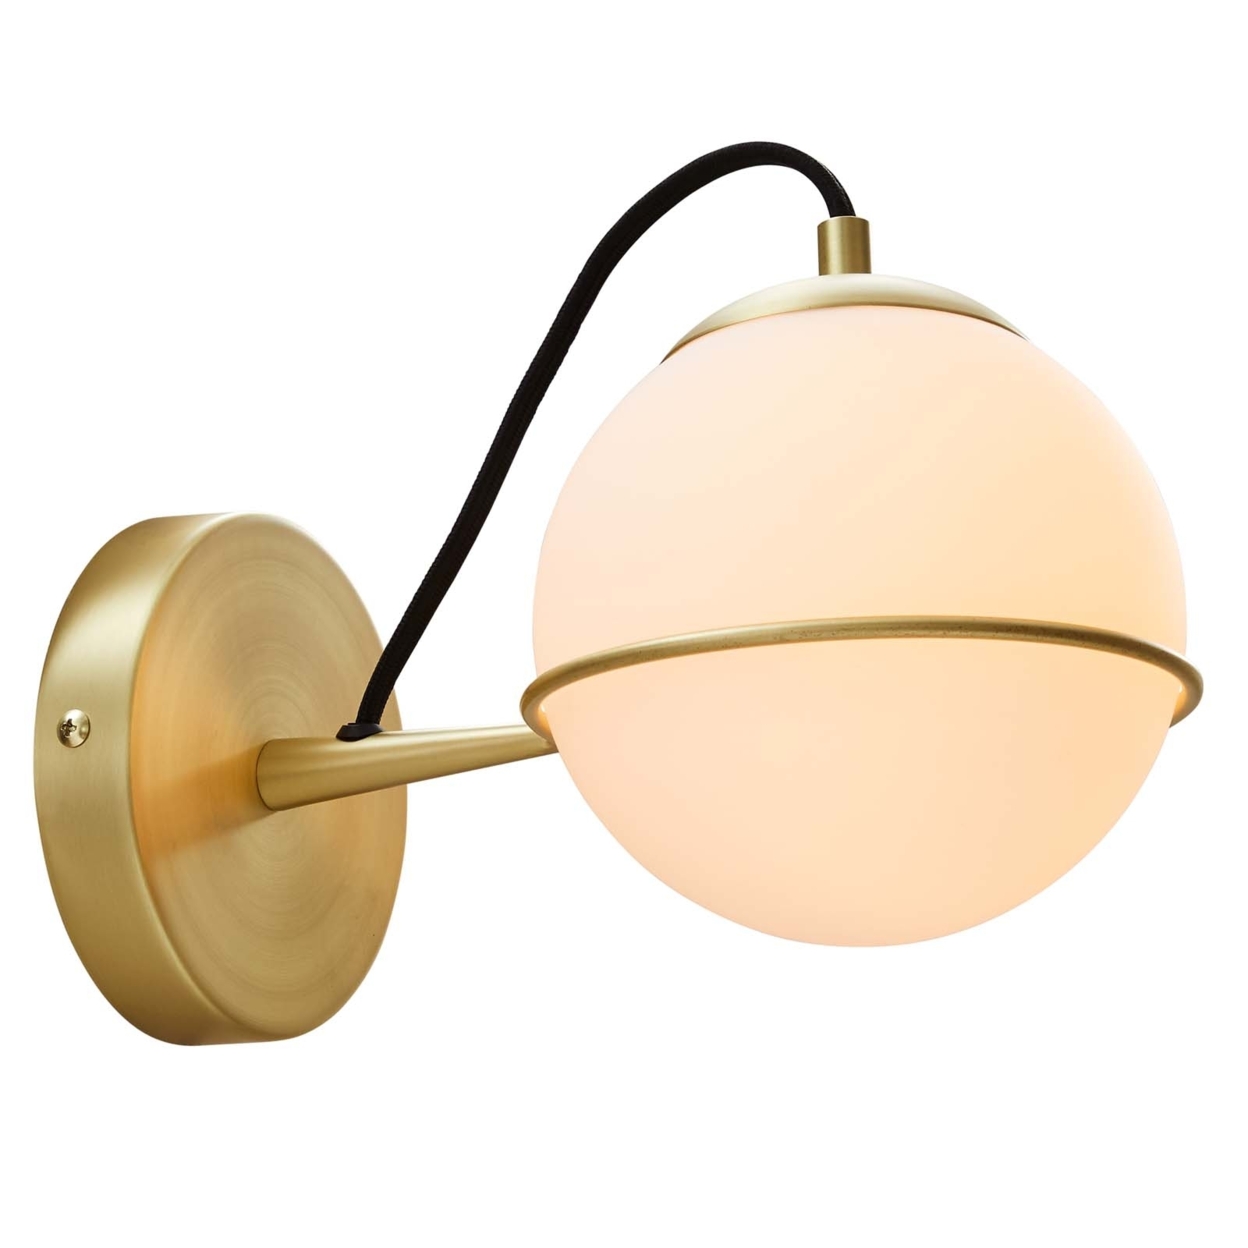 Hanna Hardwire Wall Sconce, Opal Gold